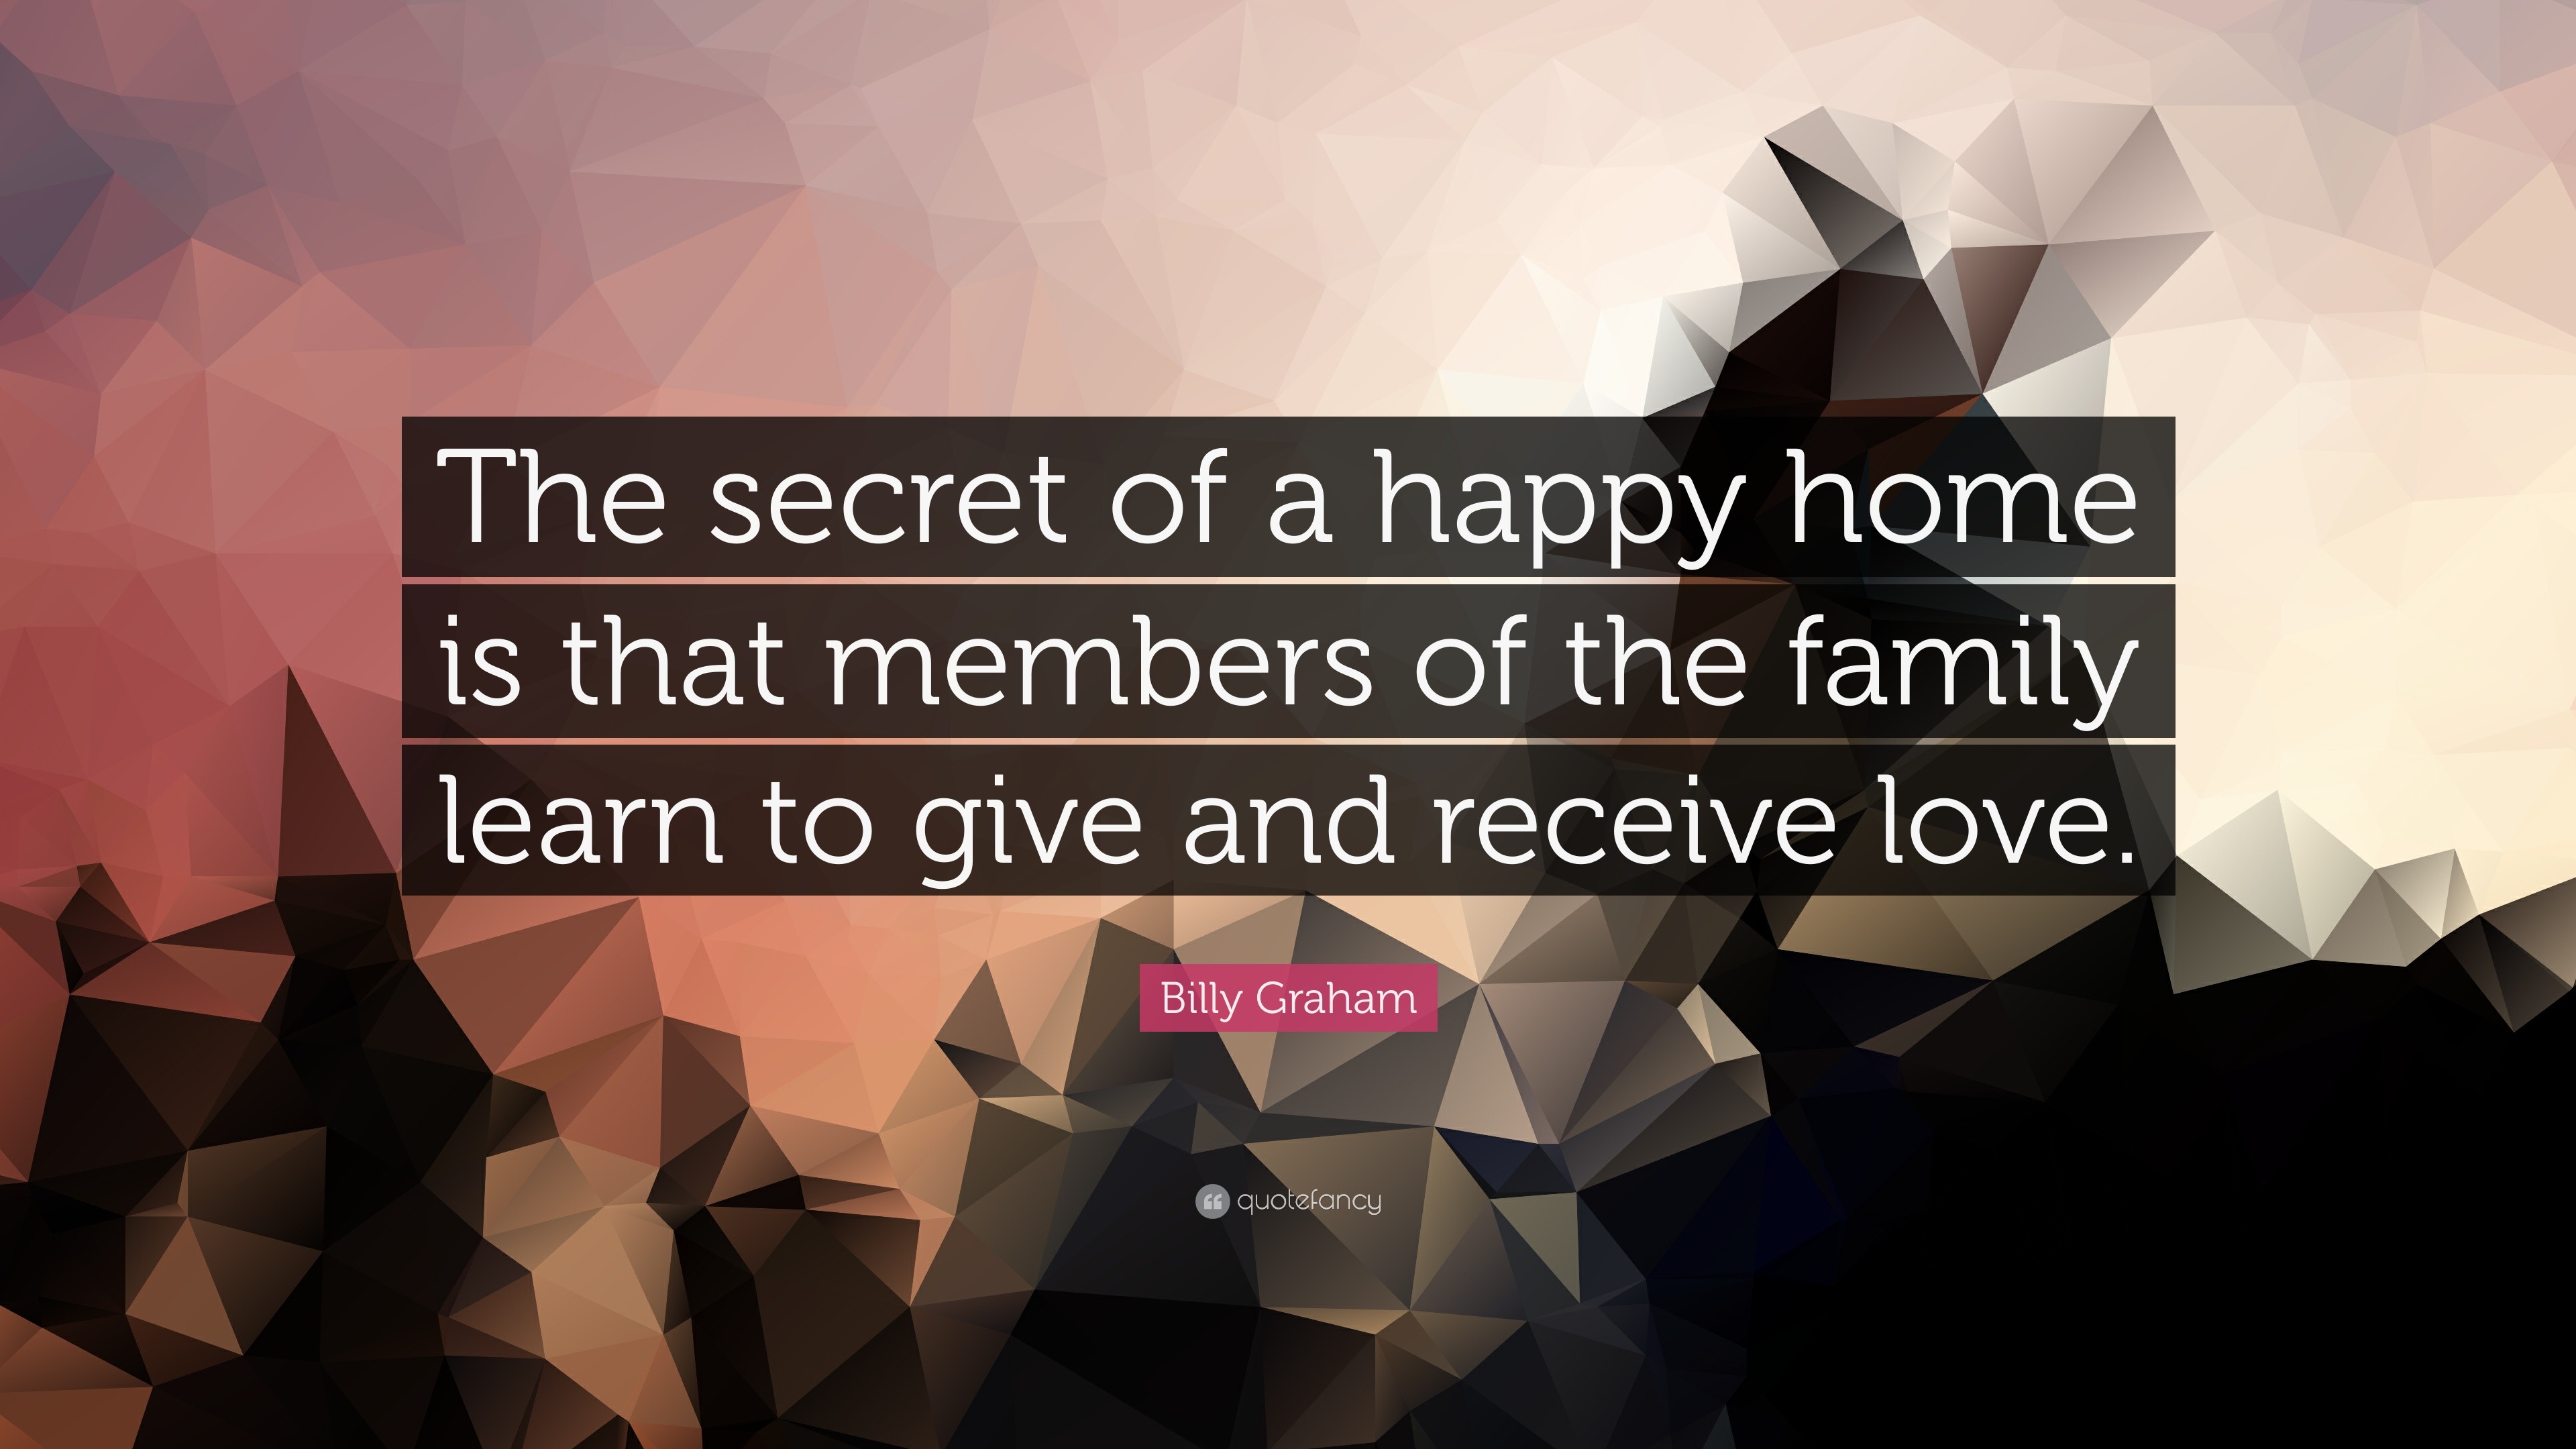 https://quotefancy.com/media/wallpaper/3840x2160/391622-Billy-Graham-Quote-The-secret-of-a-happy-home-is-that-members-of.jpg